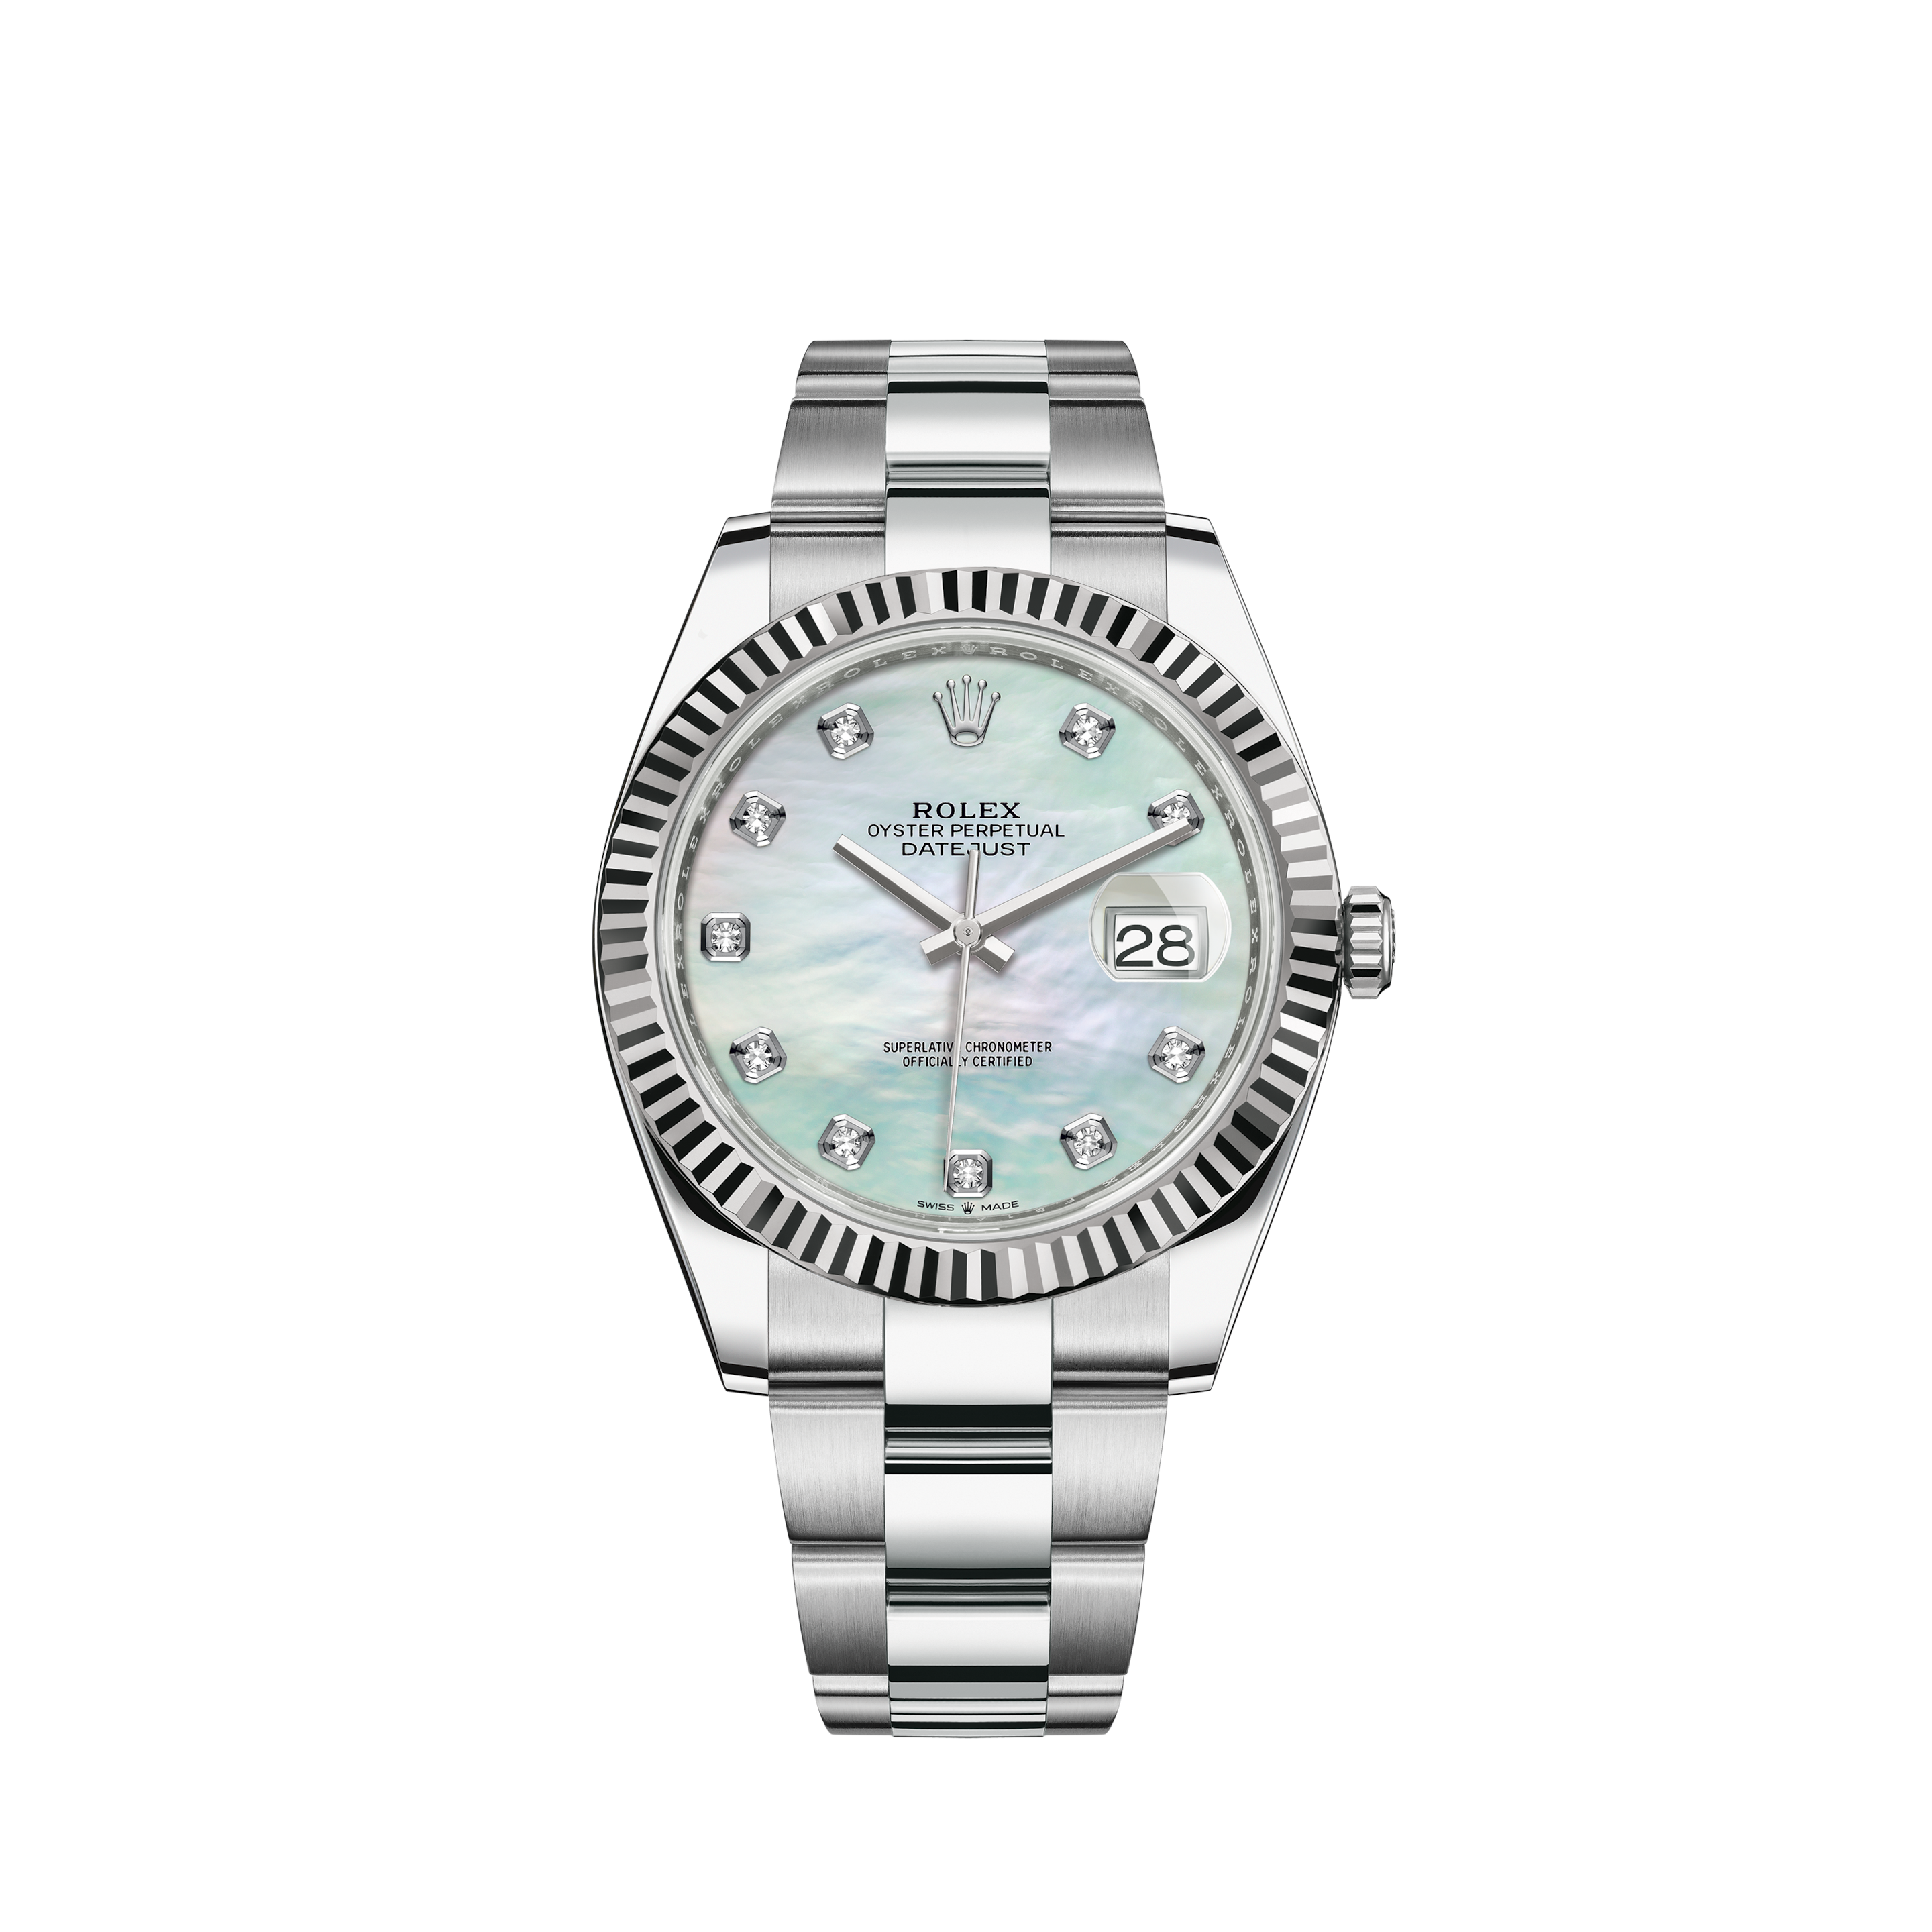 Rolex Oyster Perpetual Steel Automatic Black Dial Ladies Watch - 177200Rolex Submariner ref:14060m d series 40mm no date 2005 Black dial two liner watch